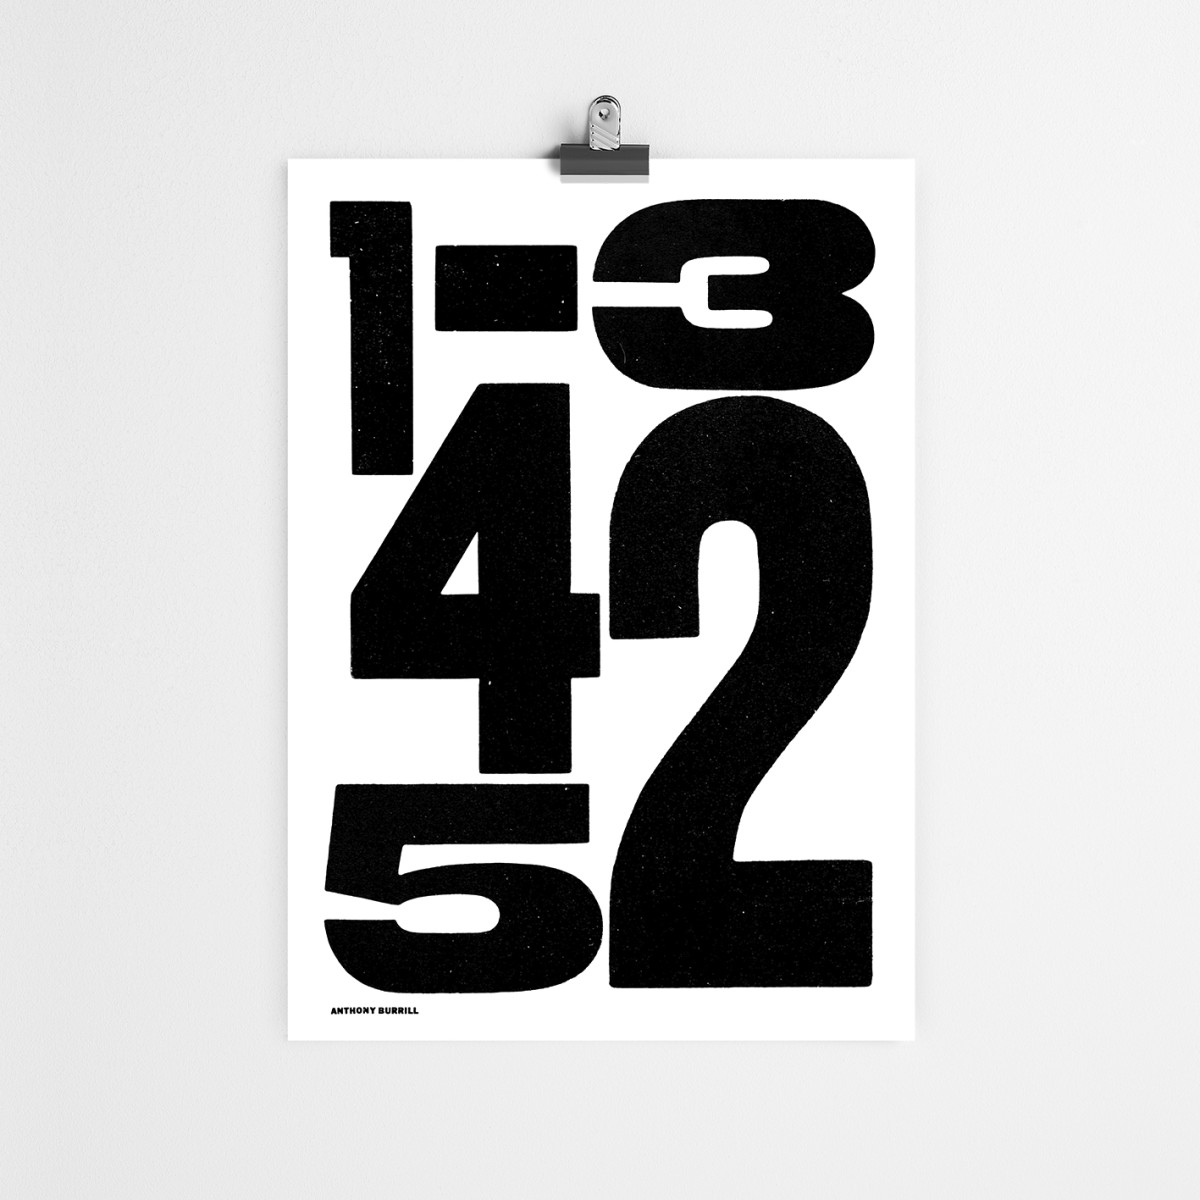 Anthony Burrill / Personal Work / Design Museum&lt;span class=&quot;slide_numbers&quot;&gt;&lt;span class=&quot;slide_number&quot;&gt;5&lt;/span&gt;/7&lt;/span&gt;